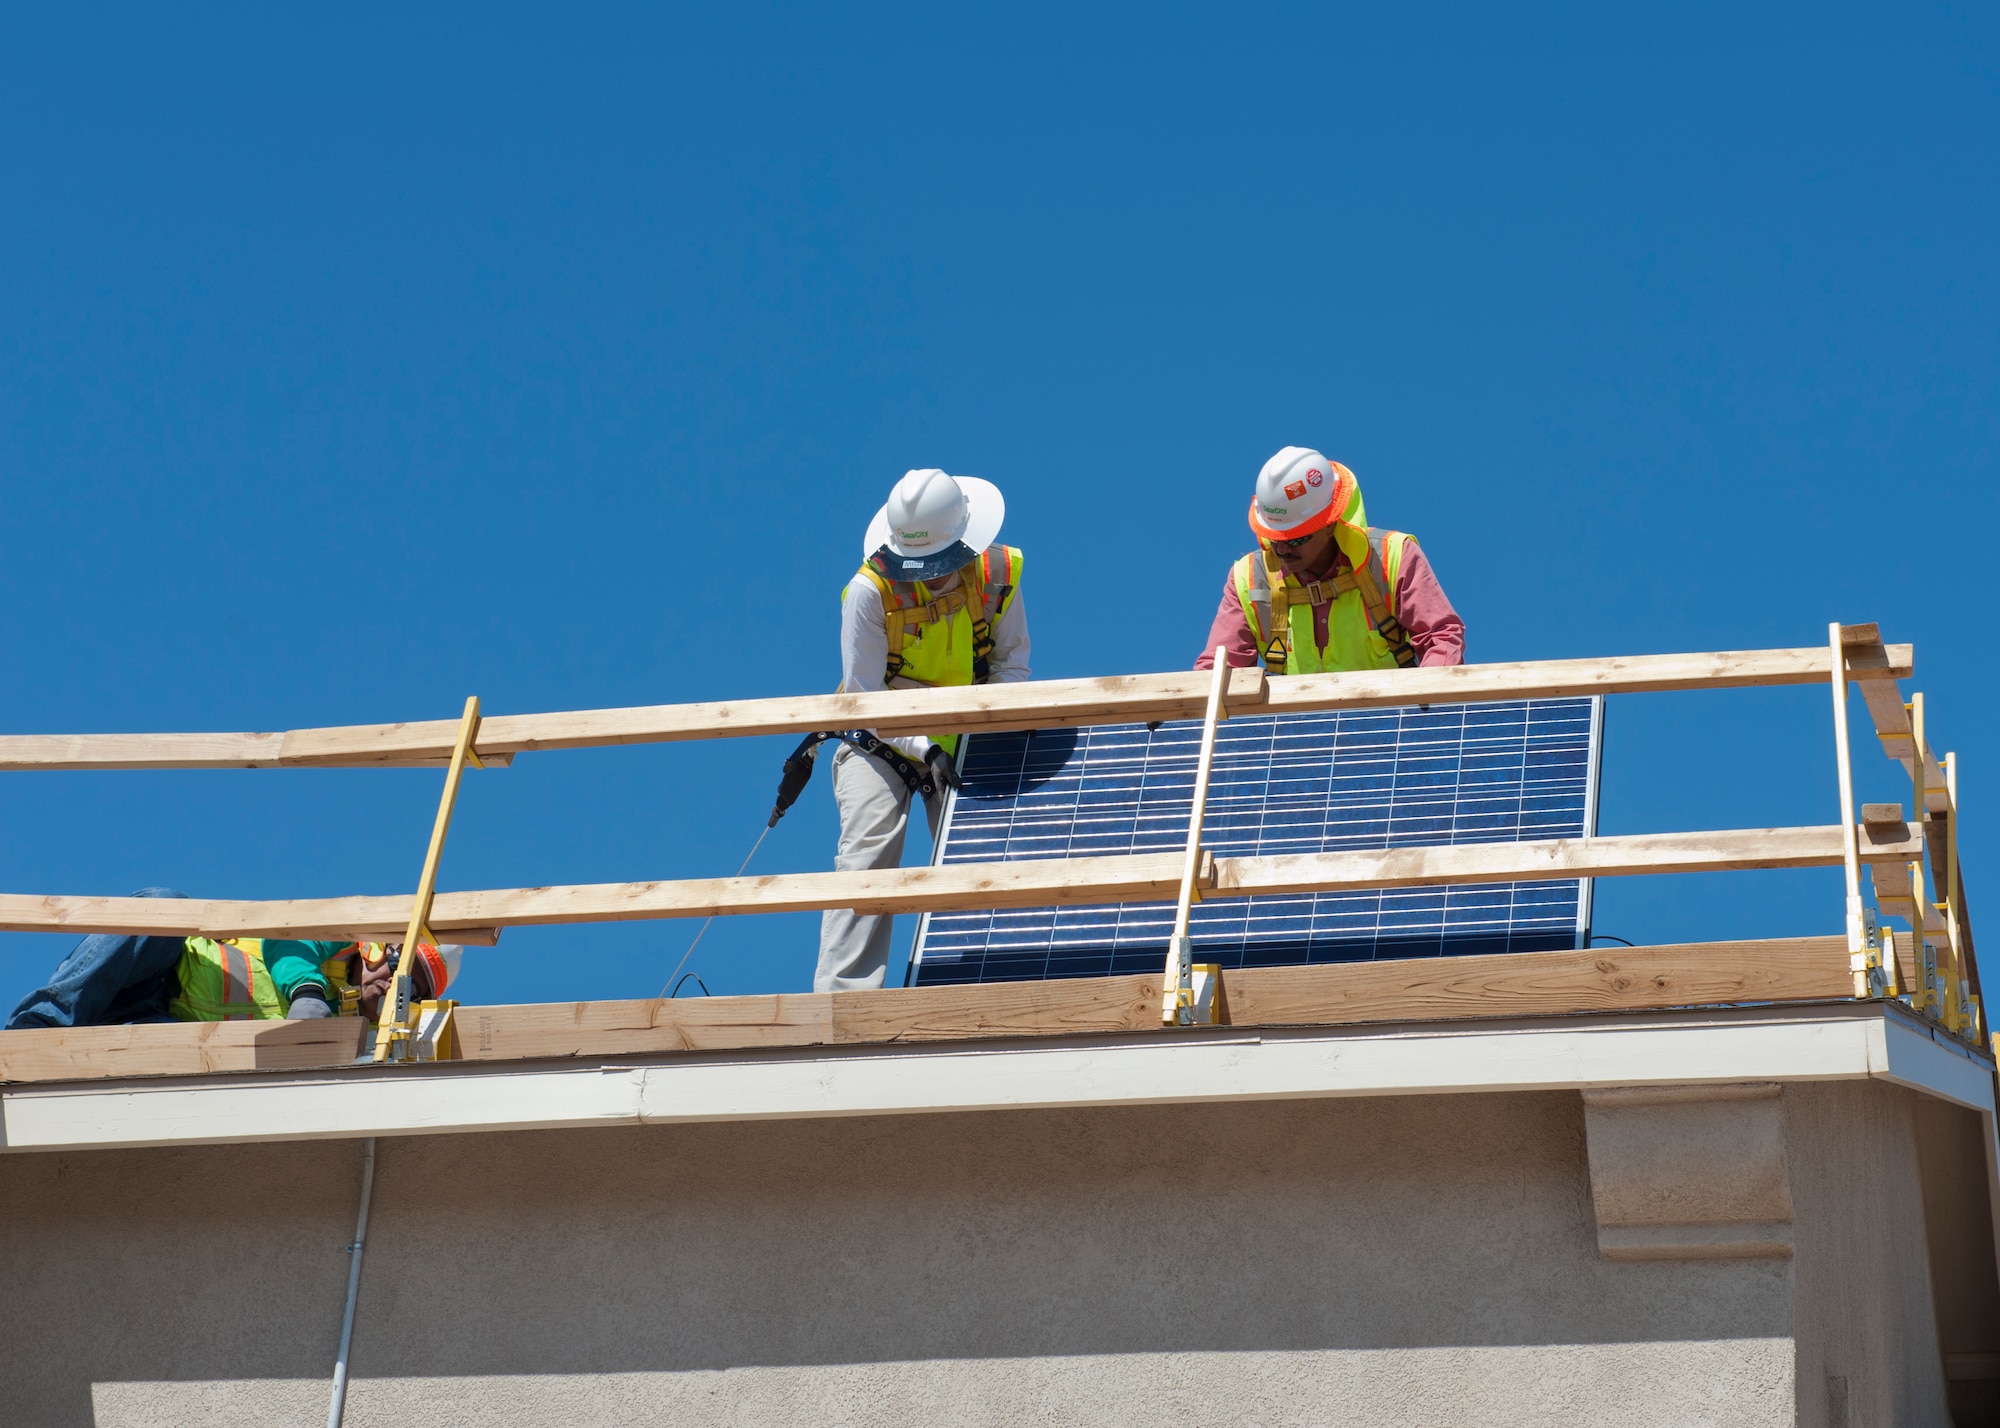 Workers prepare to install solar panels to a home at Holloman AFB, N.M., August 9th. Homes will be selected based on the amount of sun they receive, the condition of the roof and location of surrounding trees. The installation will potentially reduce the cost per kilowatt hour of energy by almost half. The project is part of the Department of Defense renewable energy plan, which will help every member of Team Holloman. (U.S. Air Force photo by Airman 1st Class Colin Cates/Released) 